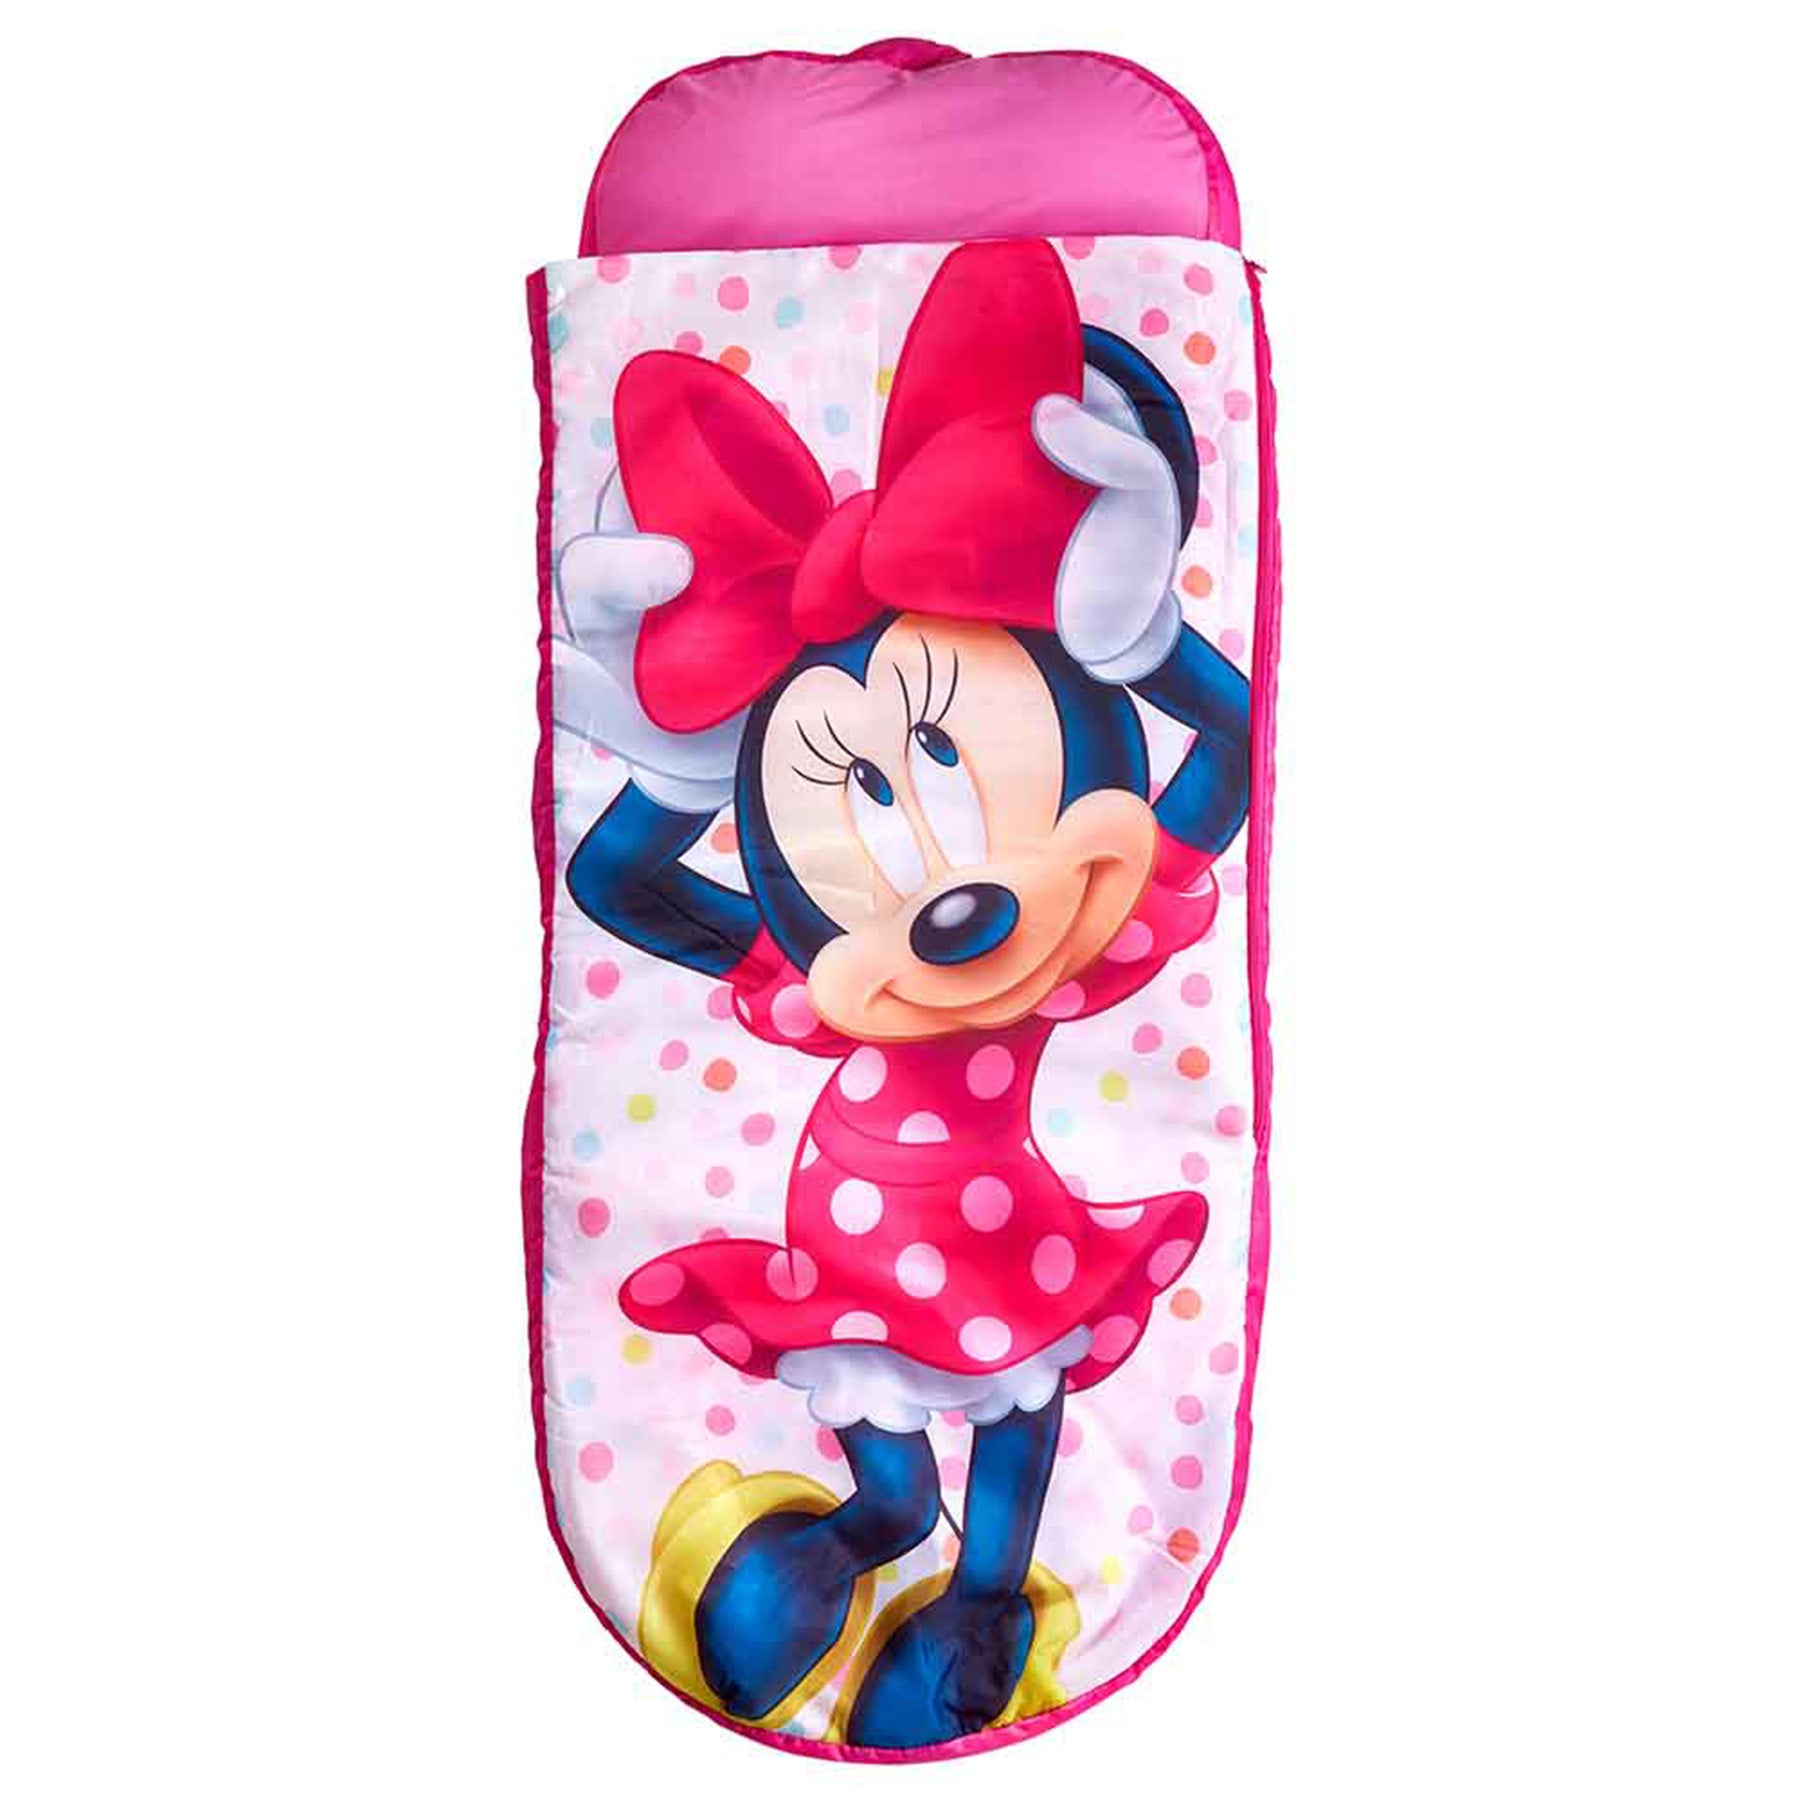 2 in 1 Minnie mouse sleeping bag & inflatable air bed